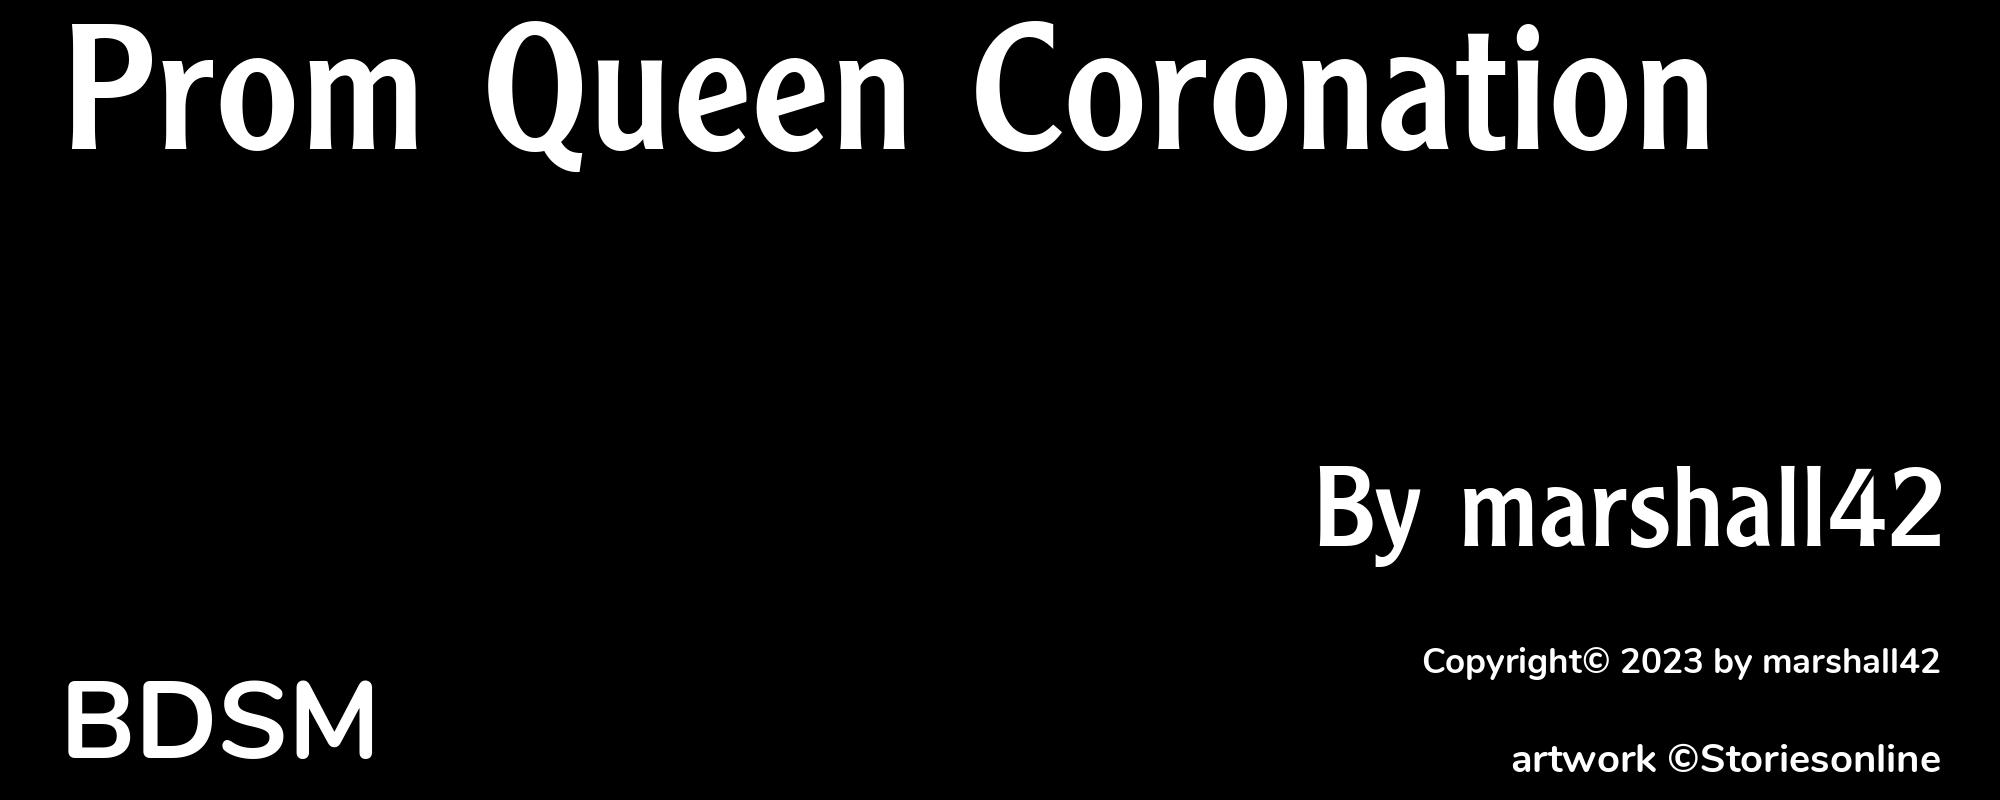 Prom Queen Coronation - Cover